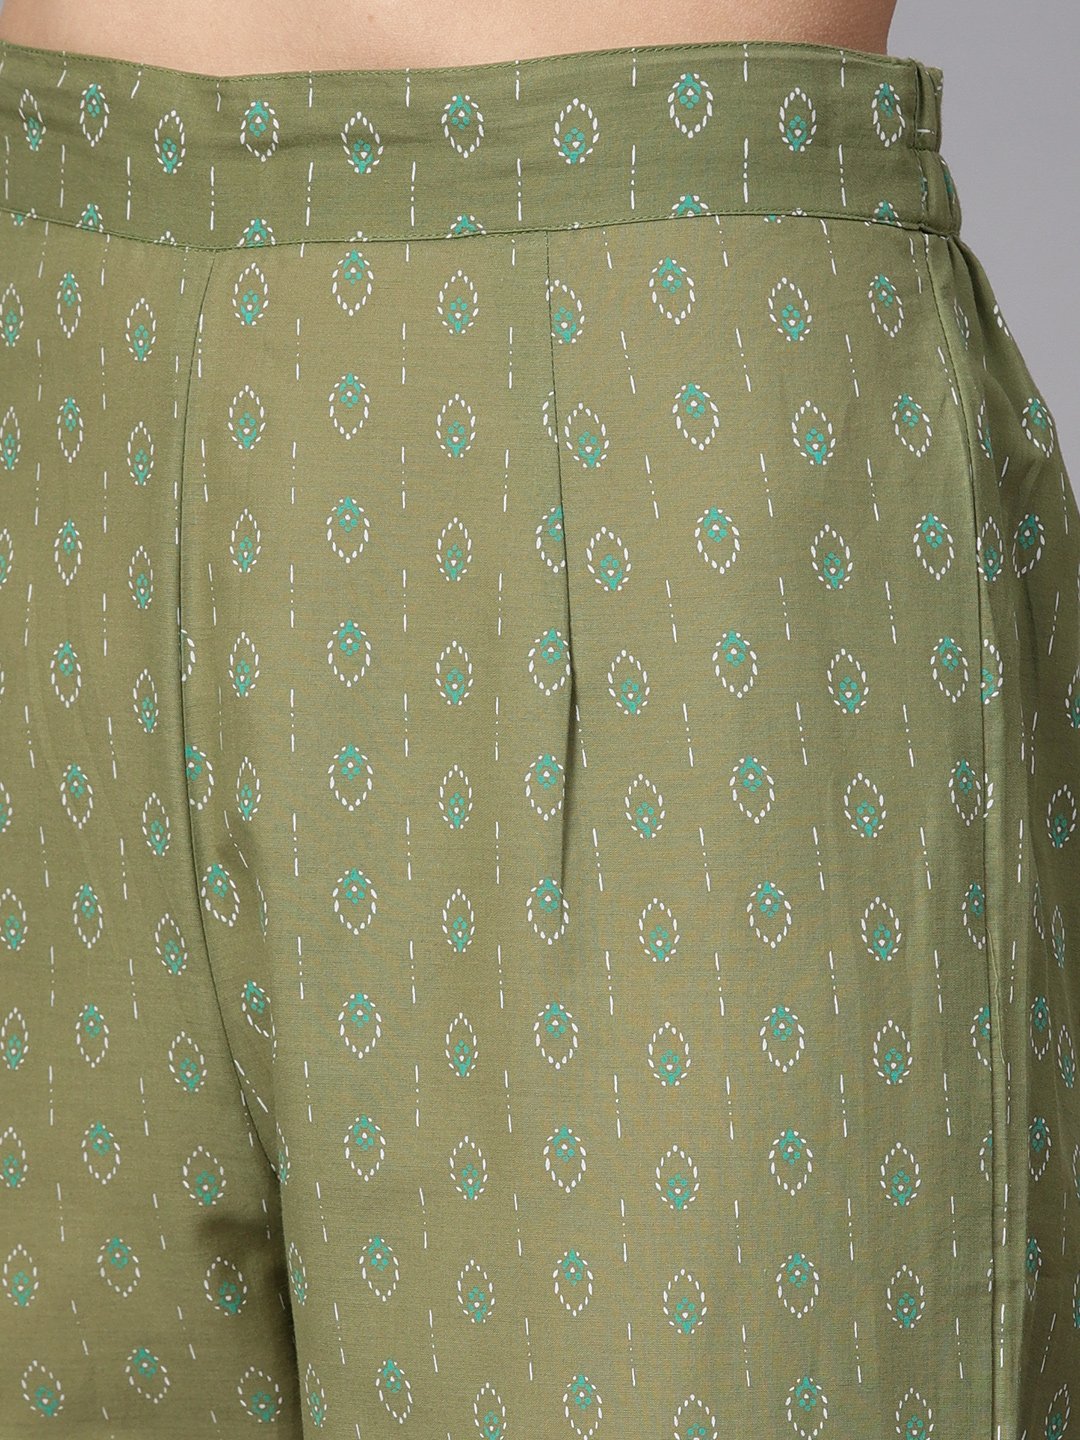 Women's Pista Green Floral Printed 3/4Th Sleeve Kurta With Pista Green Printed Pants. - Nayo Clothing